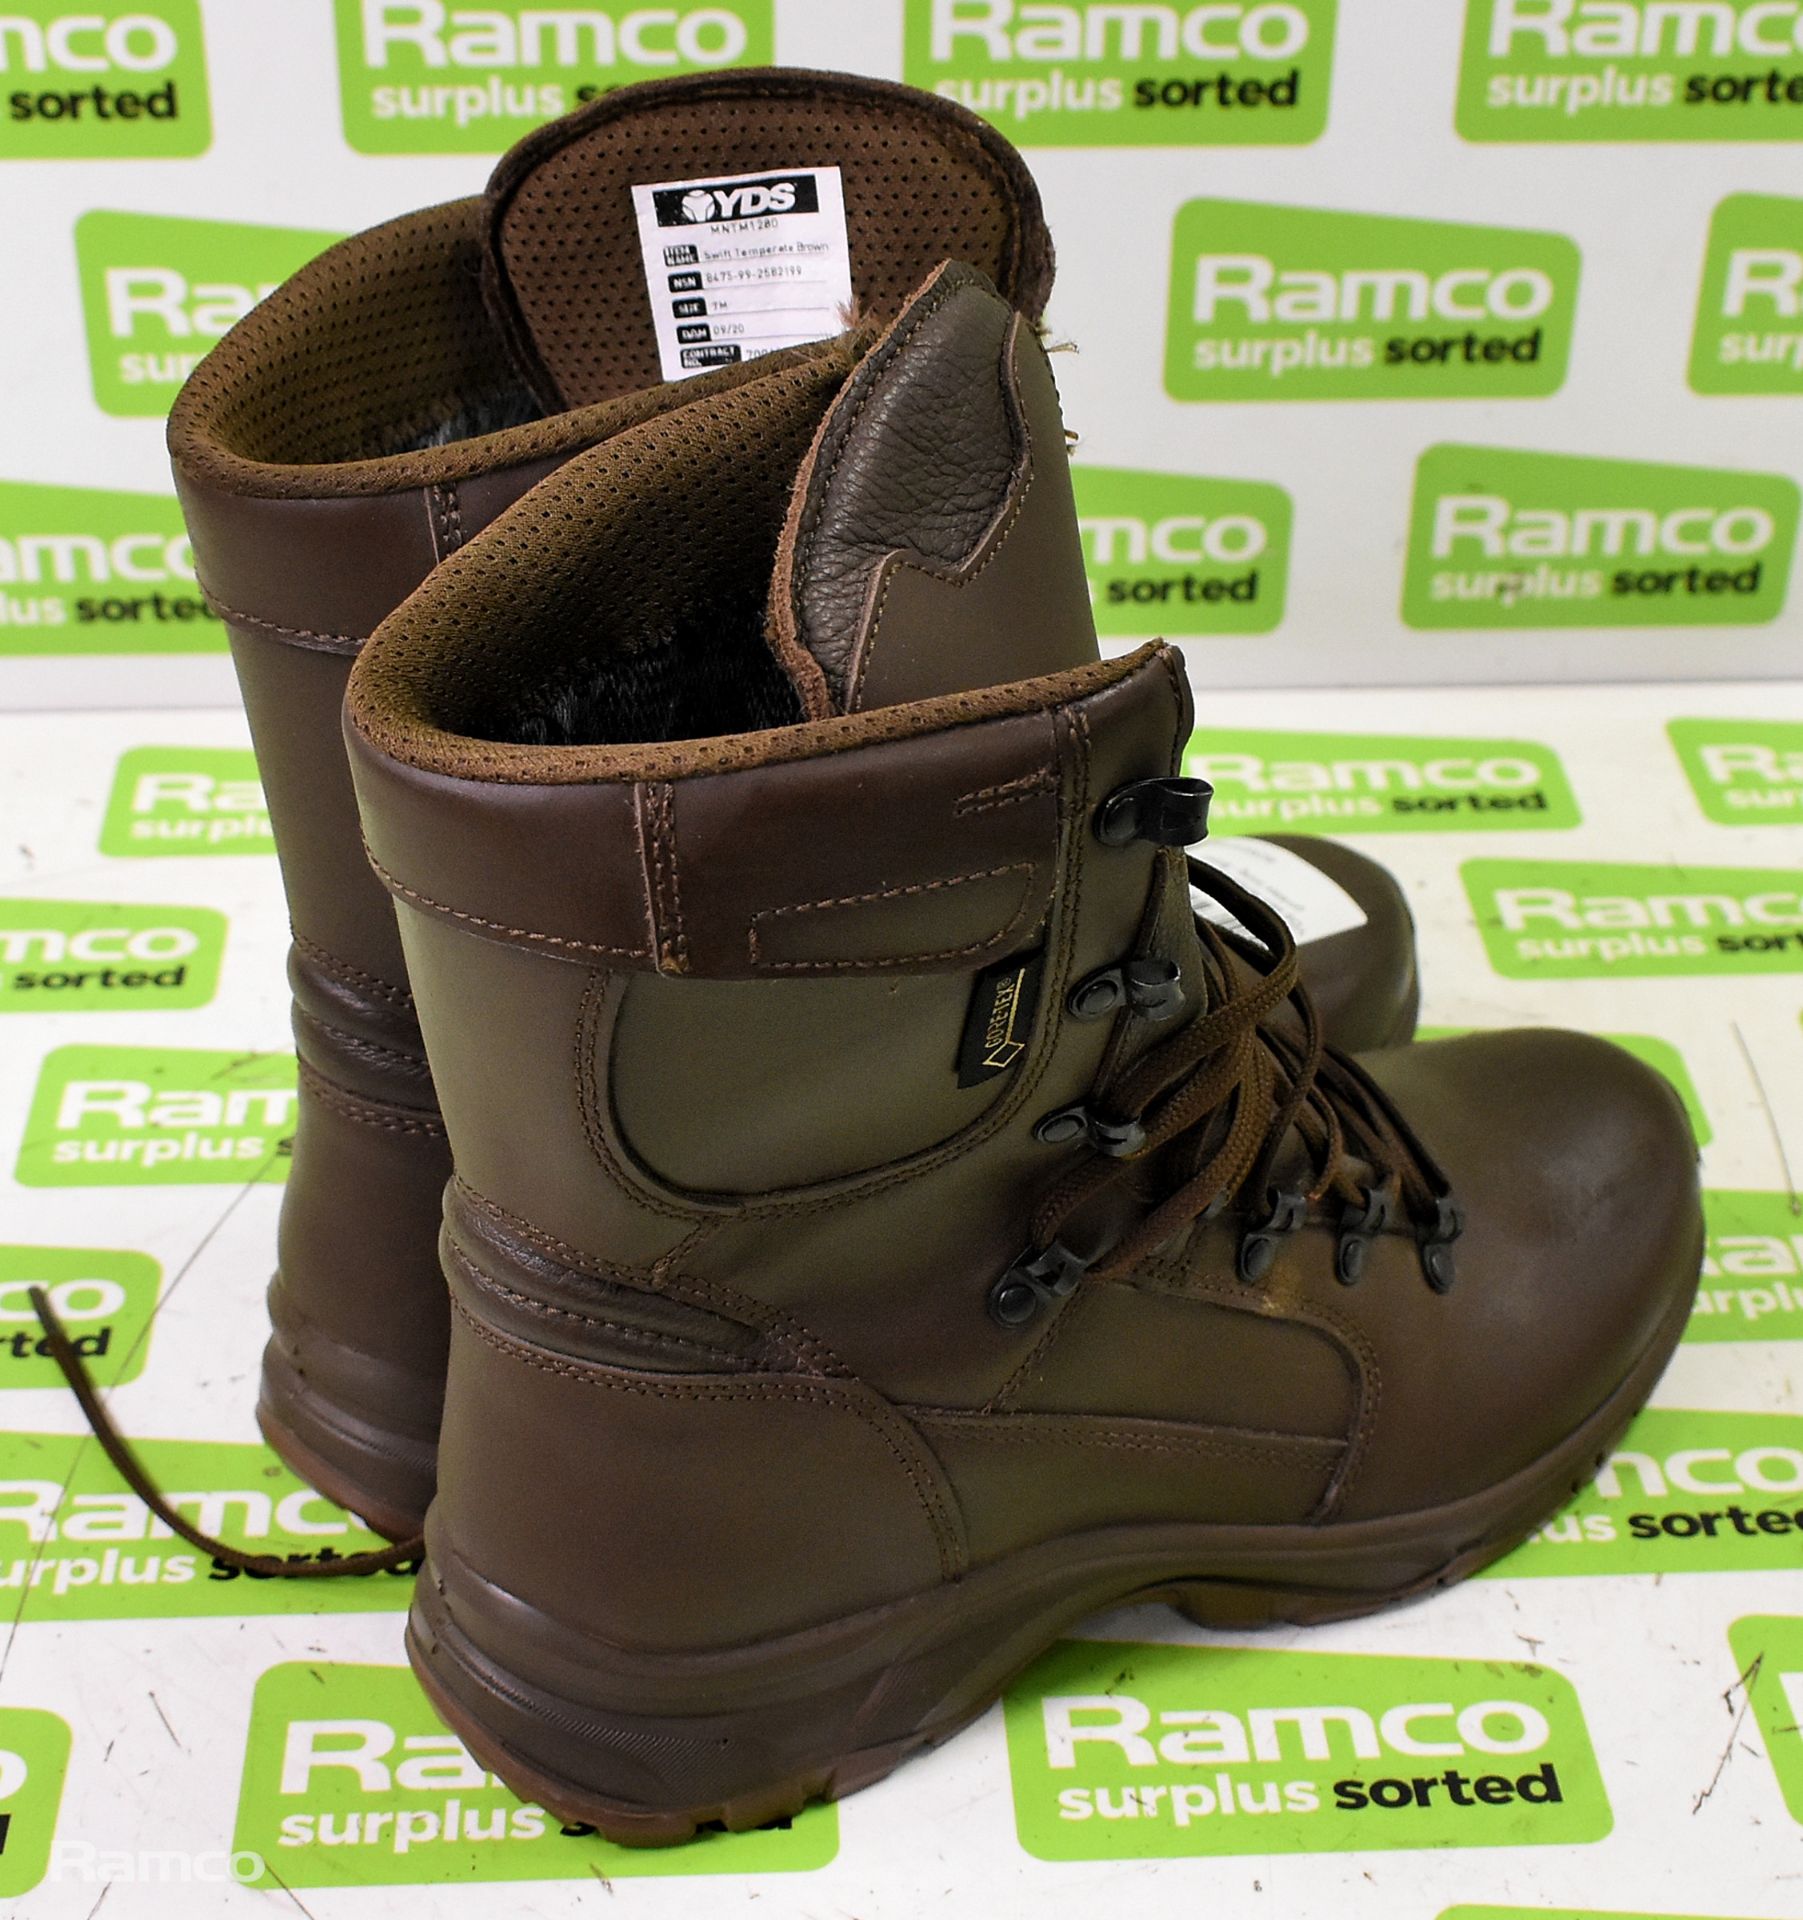 YDS swift temperate boots with Gore-tex lining - Brown - 7M - Image 2 of 5